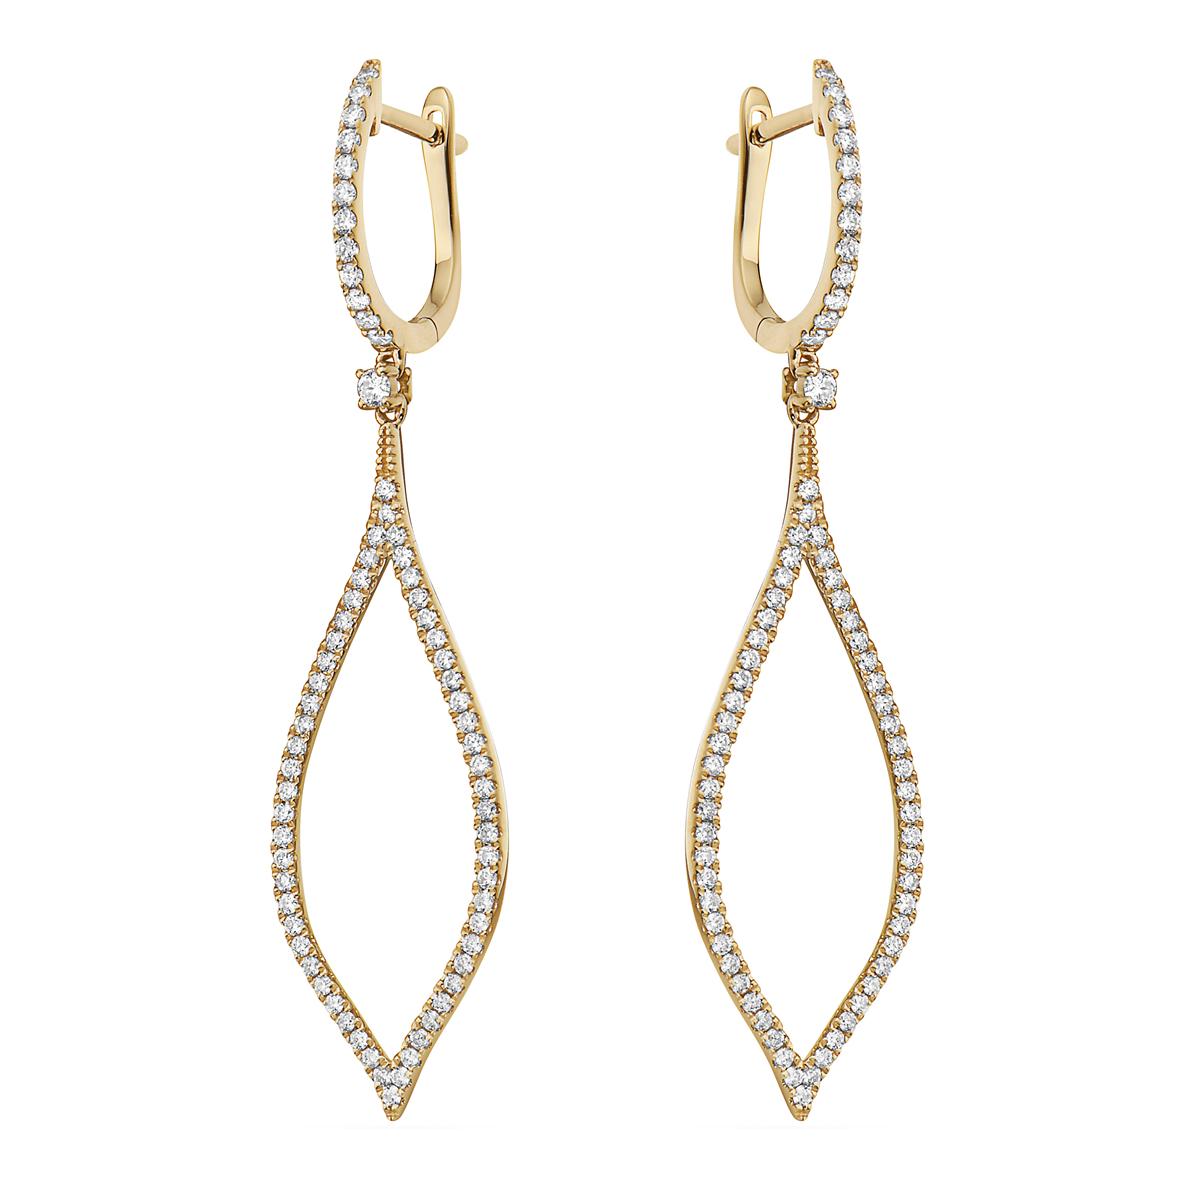 Perfect all year round these dangling earrings are a unique and beautiful accessory. This gorgeous earring is made from 140 VS2, G color diamonds totaling 0.77ct  that are expertly set in 4.1 grams of 18 karat yellow gold. They hang from a small